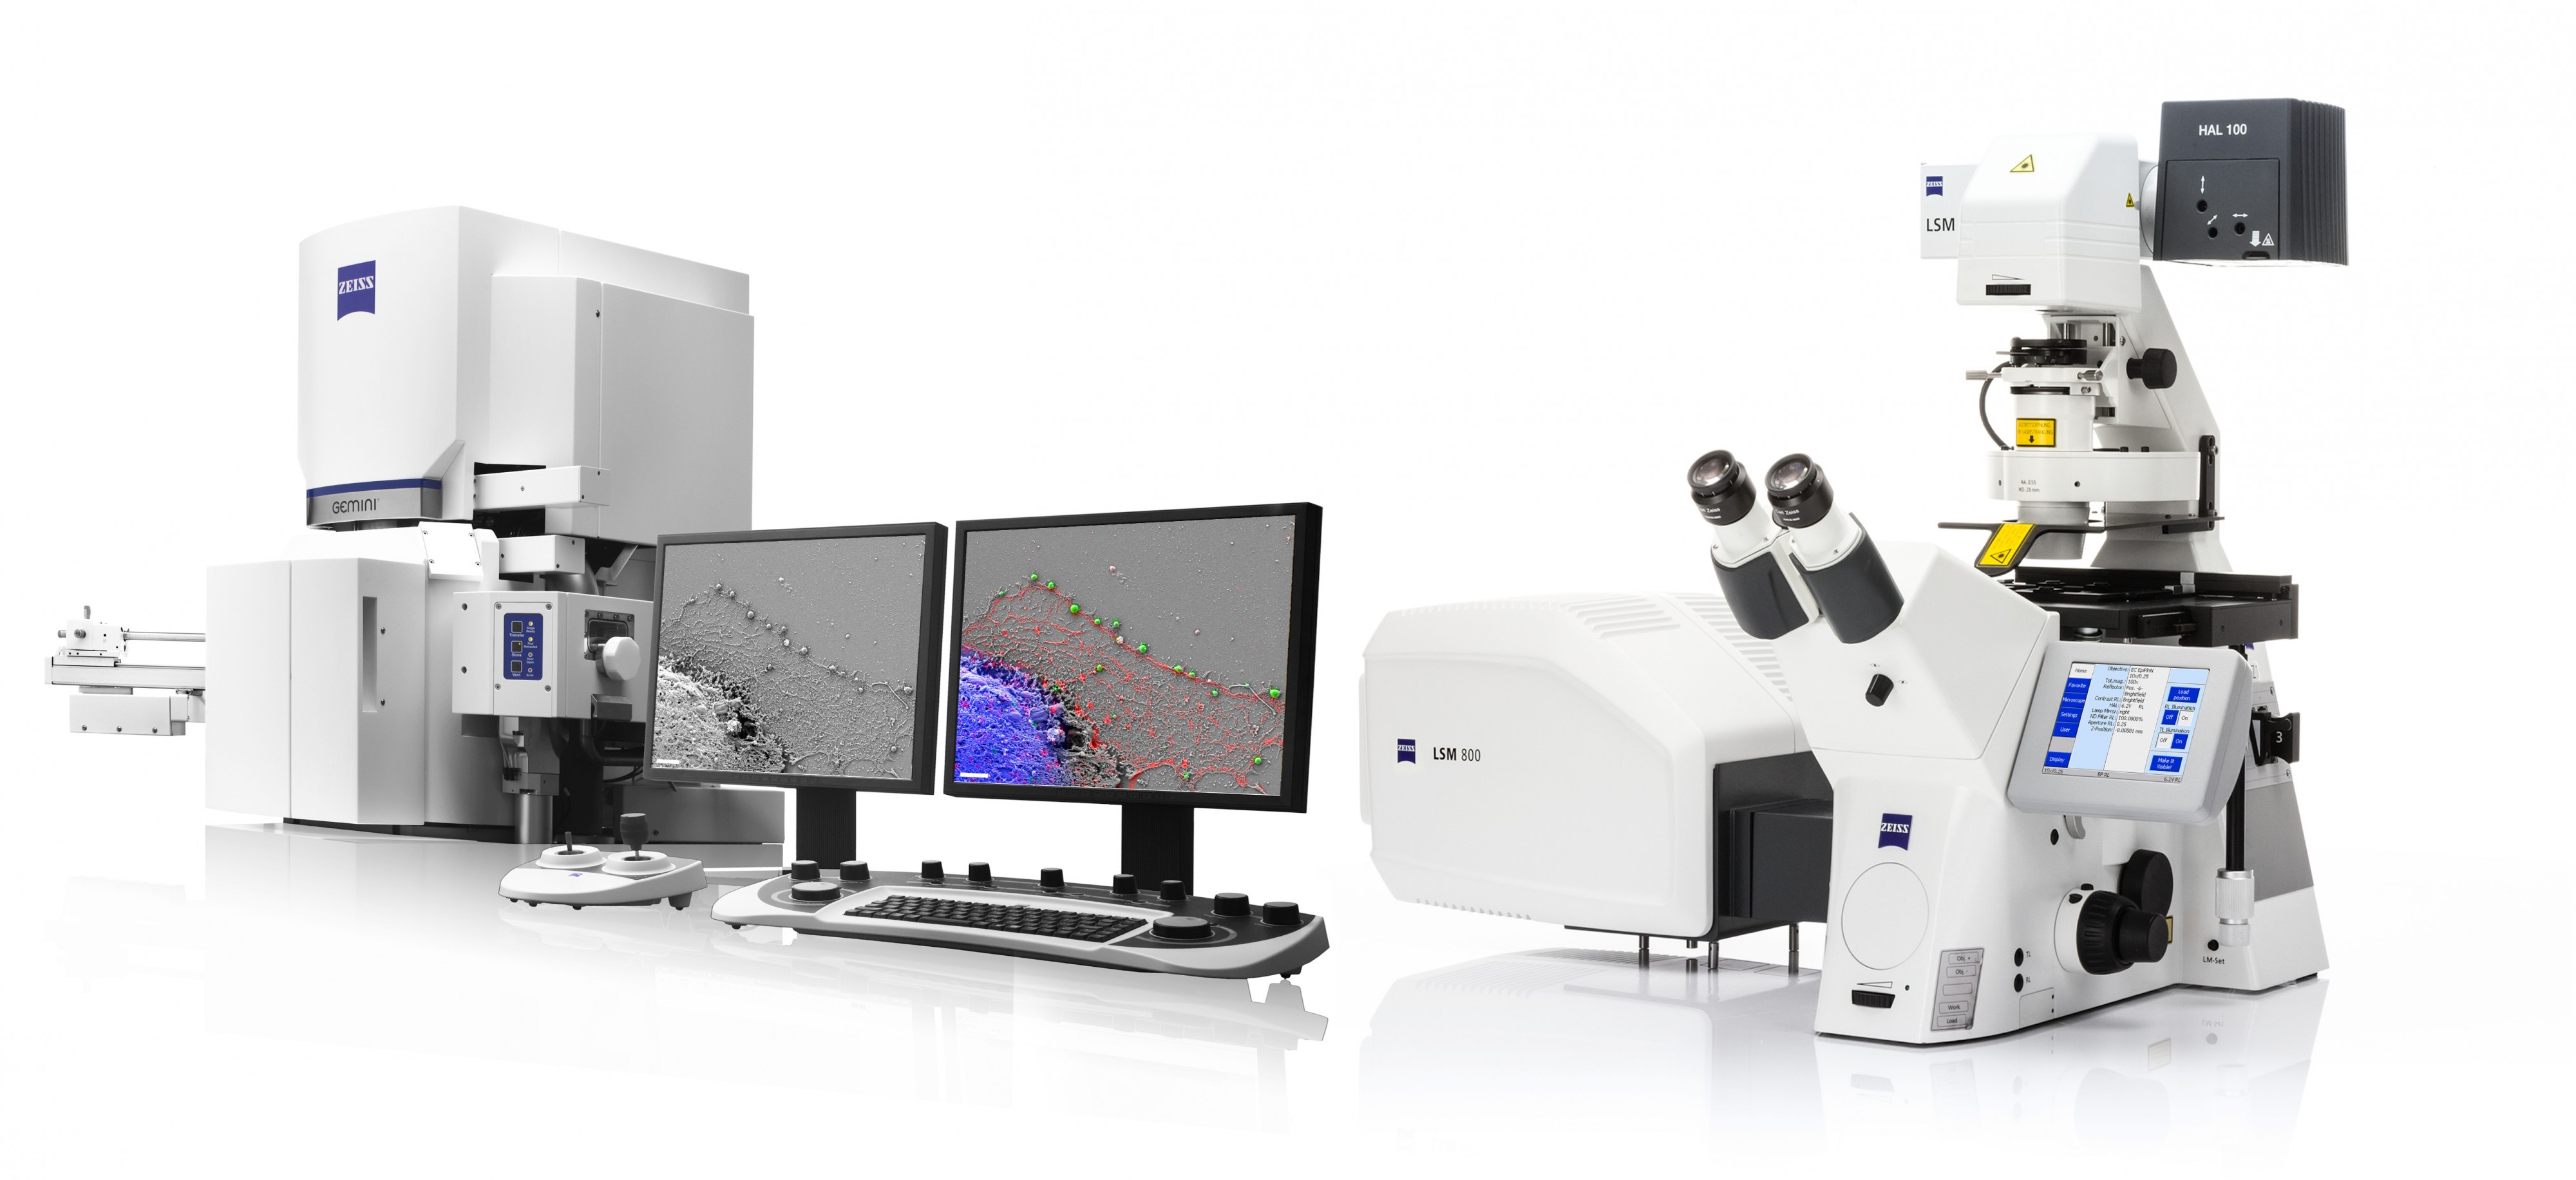 Correlative Microscopy with ZEISS Shuttle&Find - MERLIN and LSM 800 (16292616486)